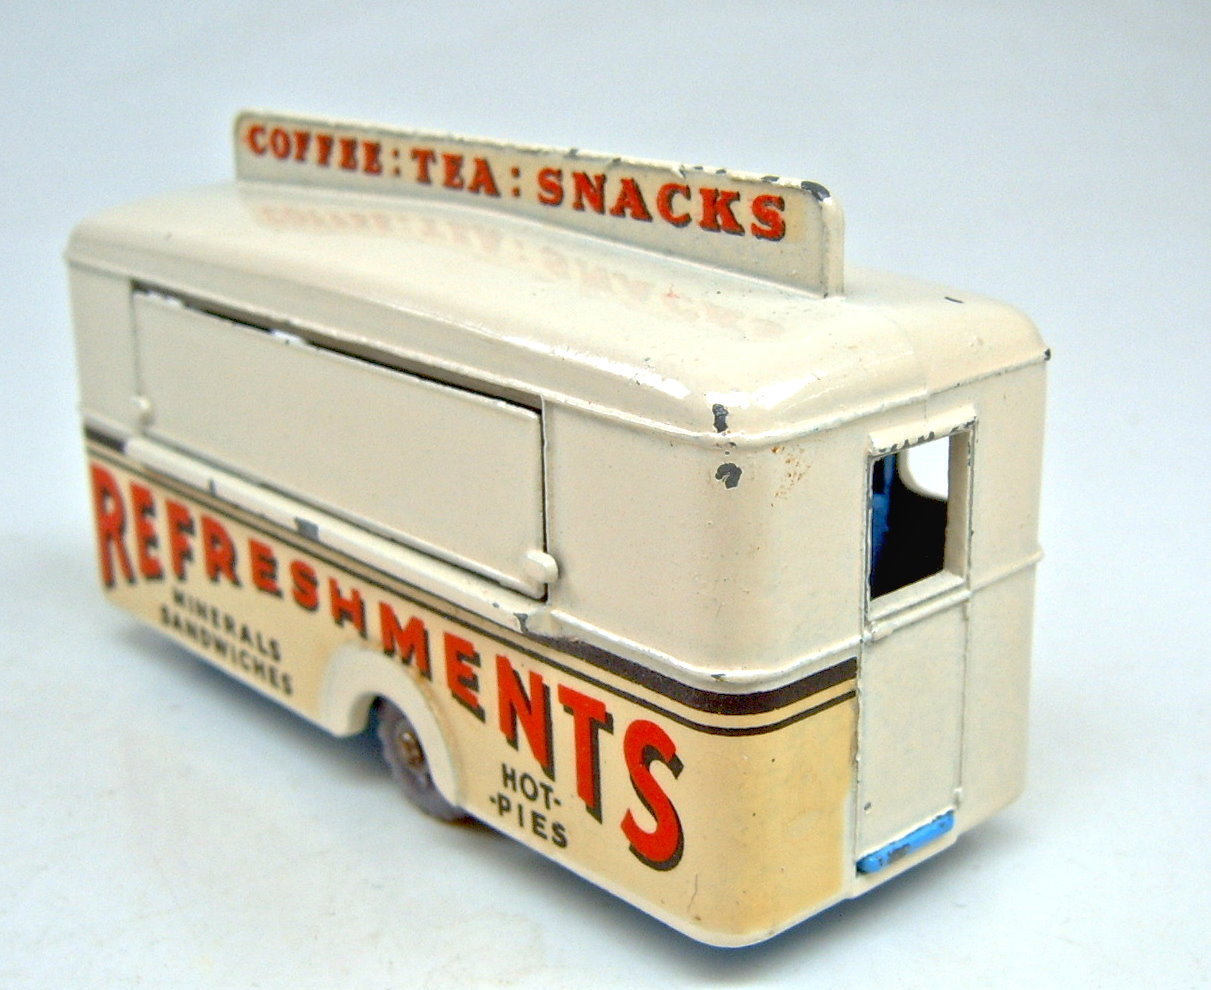 Matchbox Mobile Refreshment Canteen Stickers       MB-74A